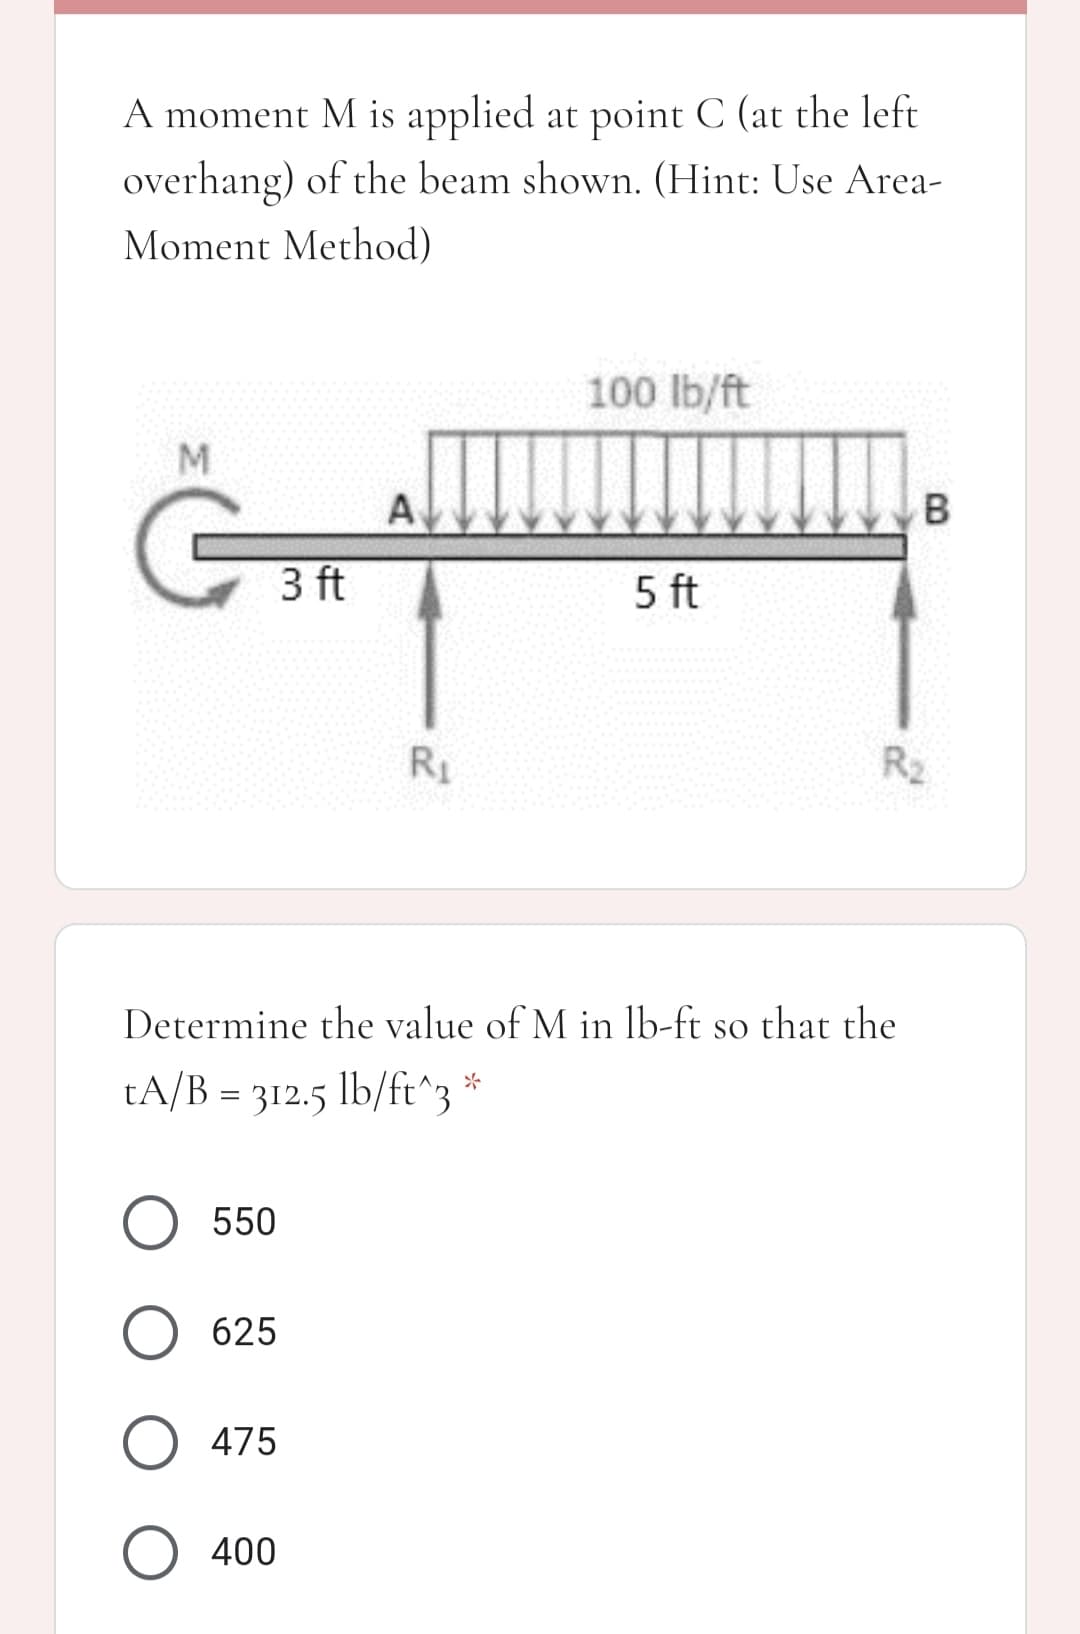 A moment M is applied at point C (at the left
overhang) of the beam shown. (Hint: Use Area-
Moment Method)
100 lb/ft
A
3 ft
5 ft
R1
R2
Determine the value of M in lb-ft so that the
tA/B = 312.5 lb/ft^3 *
O 550
625
O 475
O 400
B.
